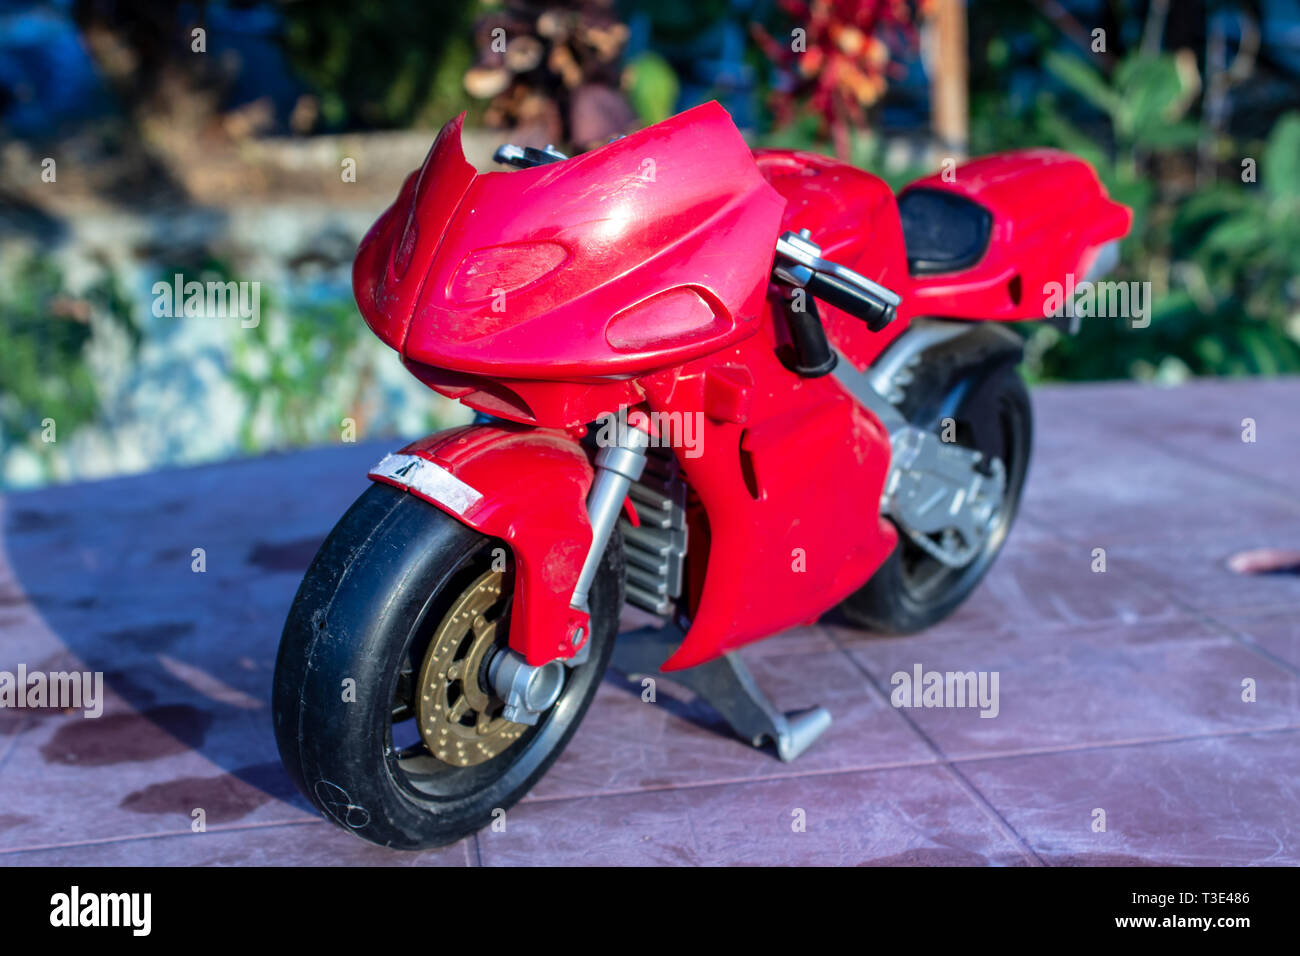 a isolated closeup red toy motorcycle with cold colors. photo has taken from a garden. Stock Photo